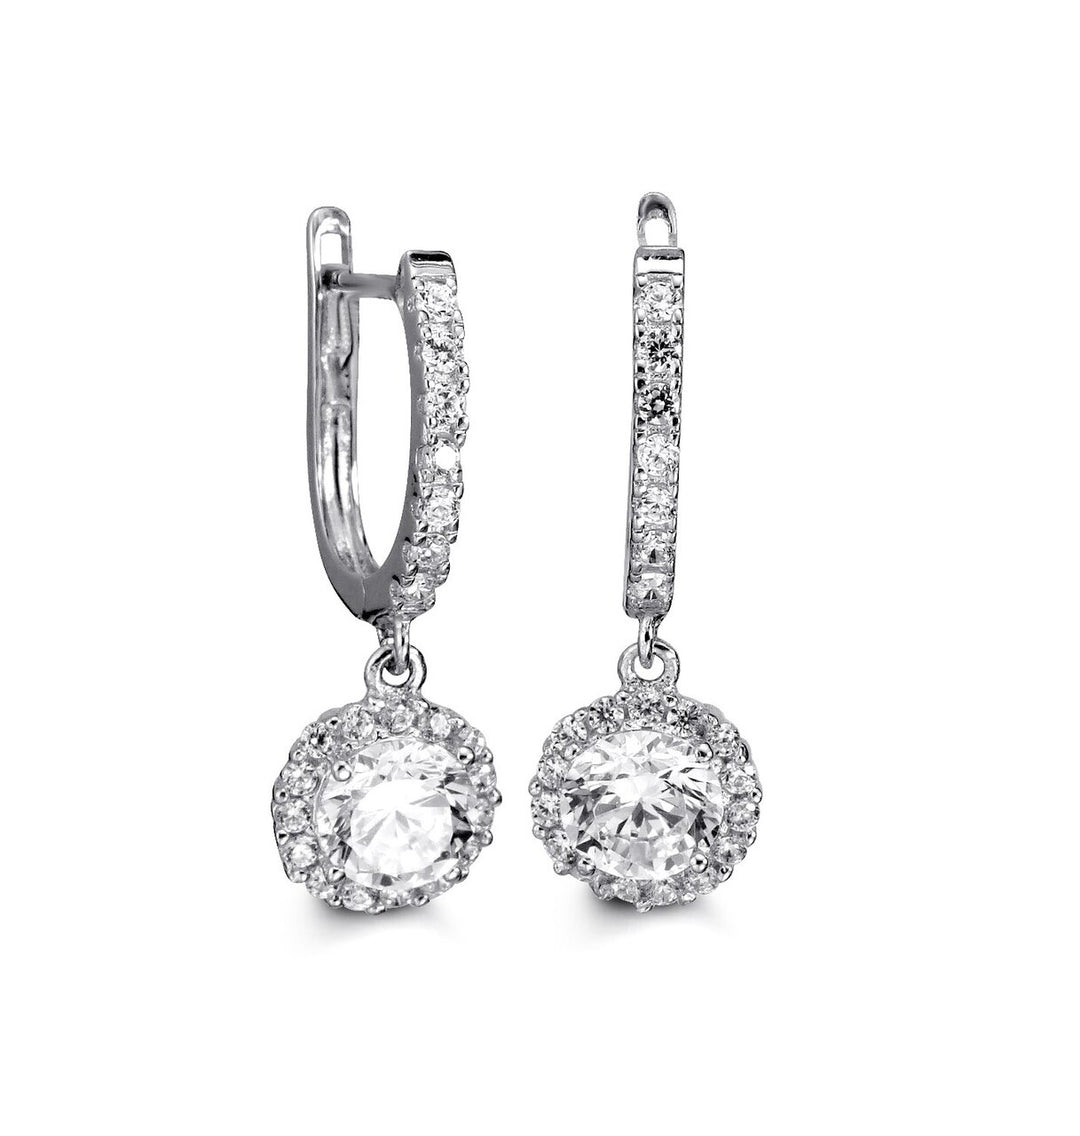 10K white gold huggie earrings with a round cubic zirconia drop, encased in a sparkling halo setting.